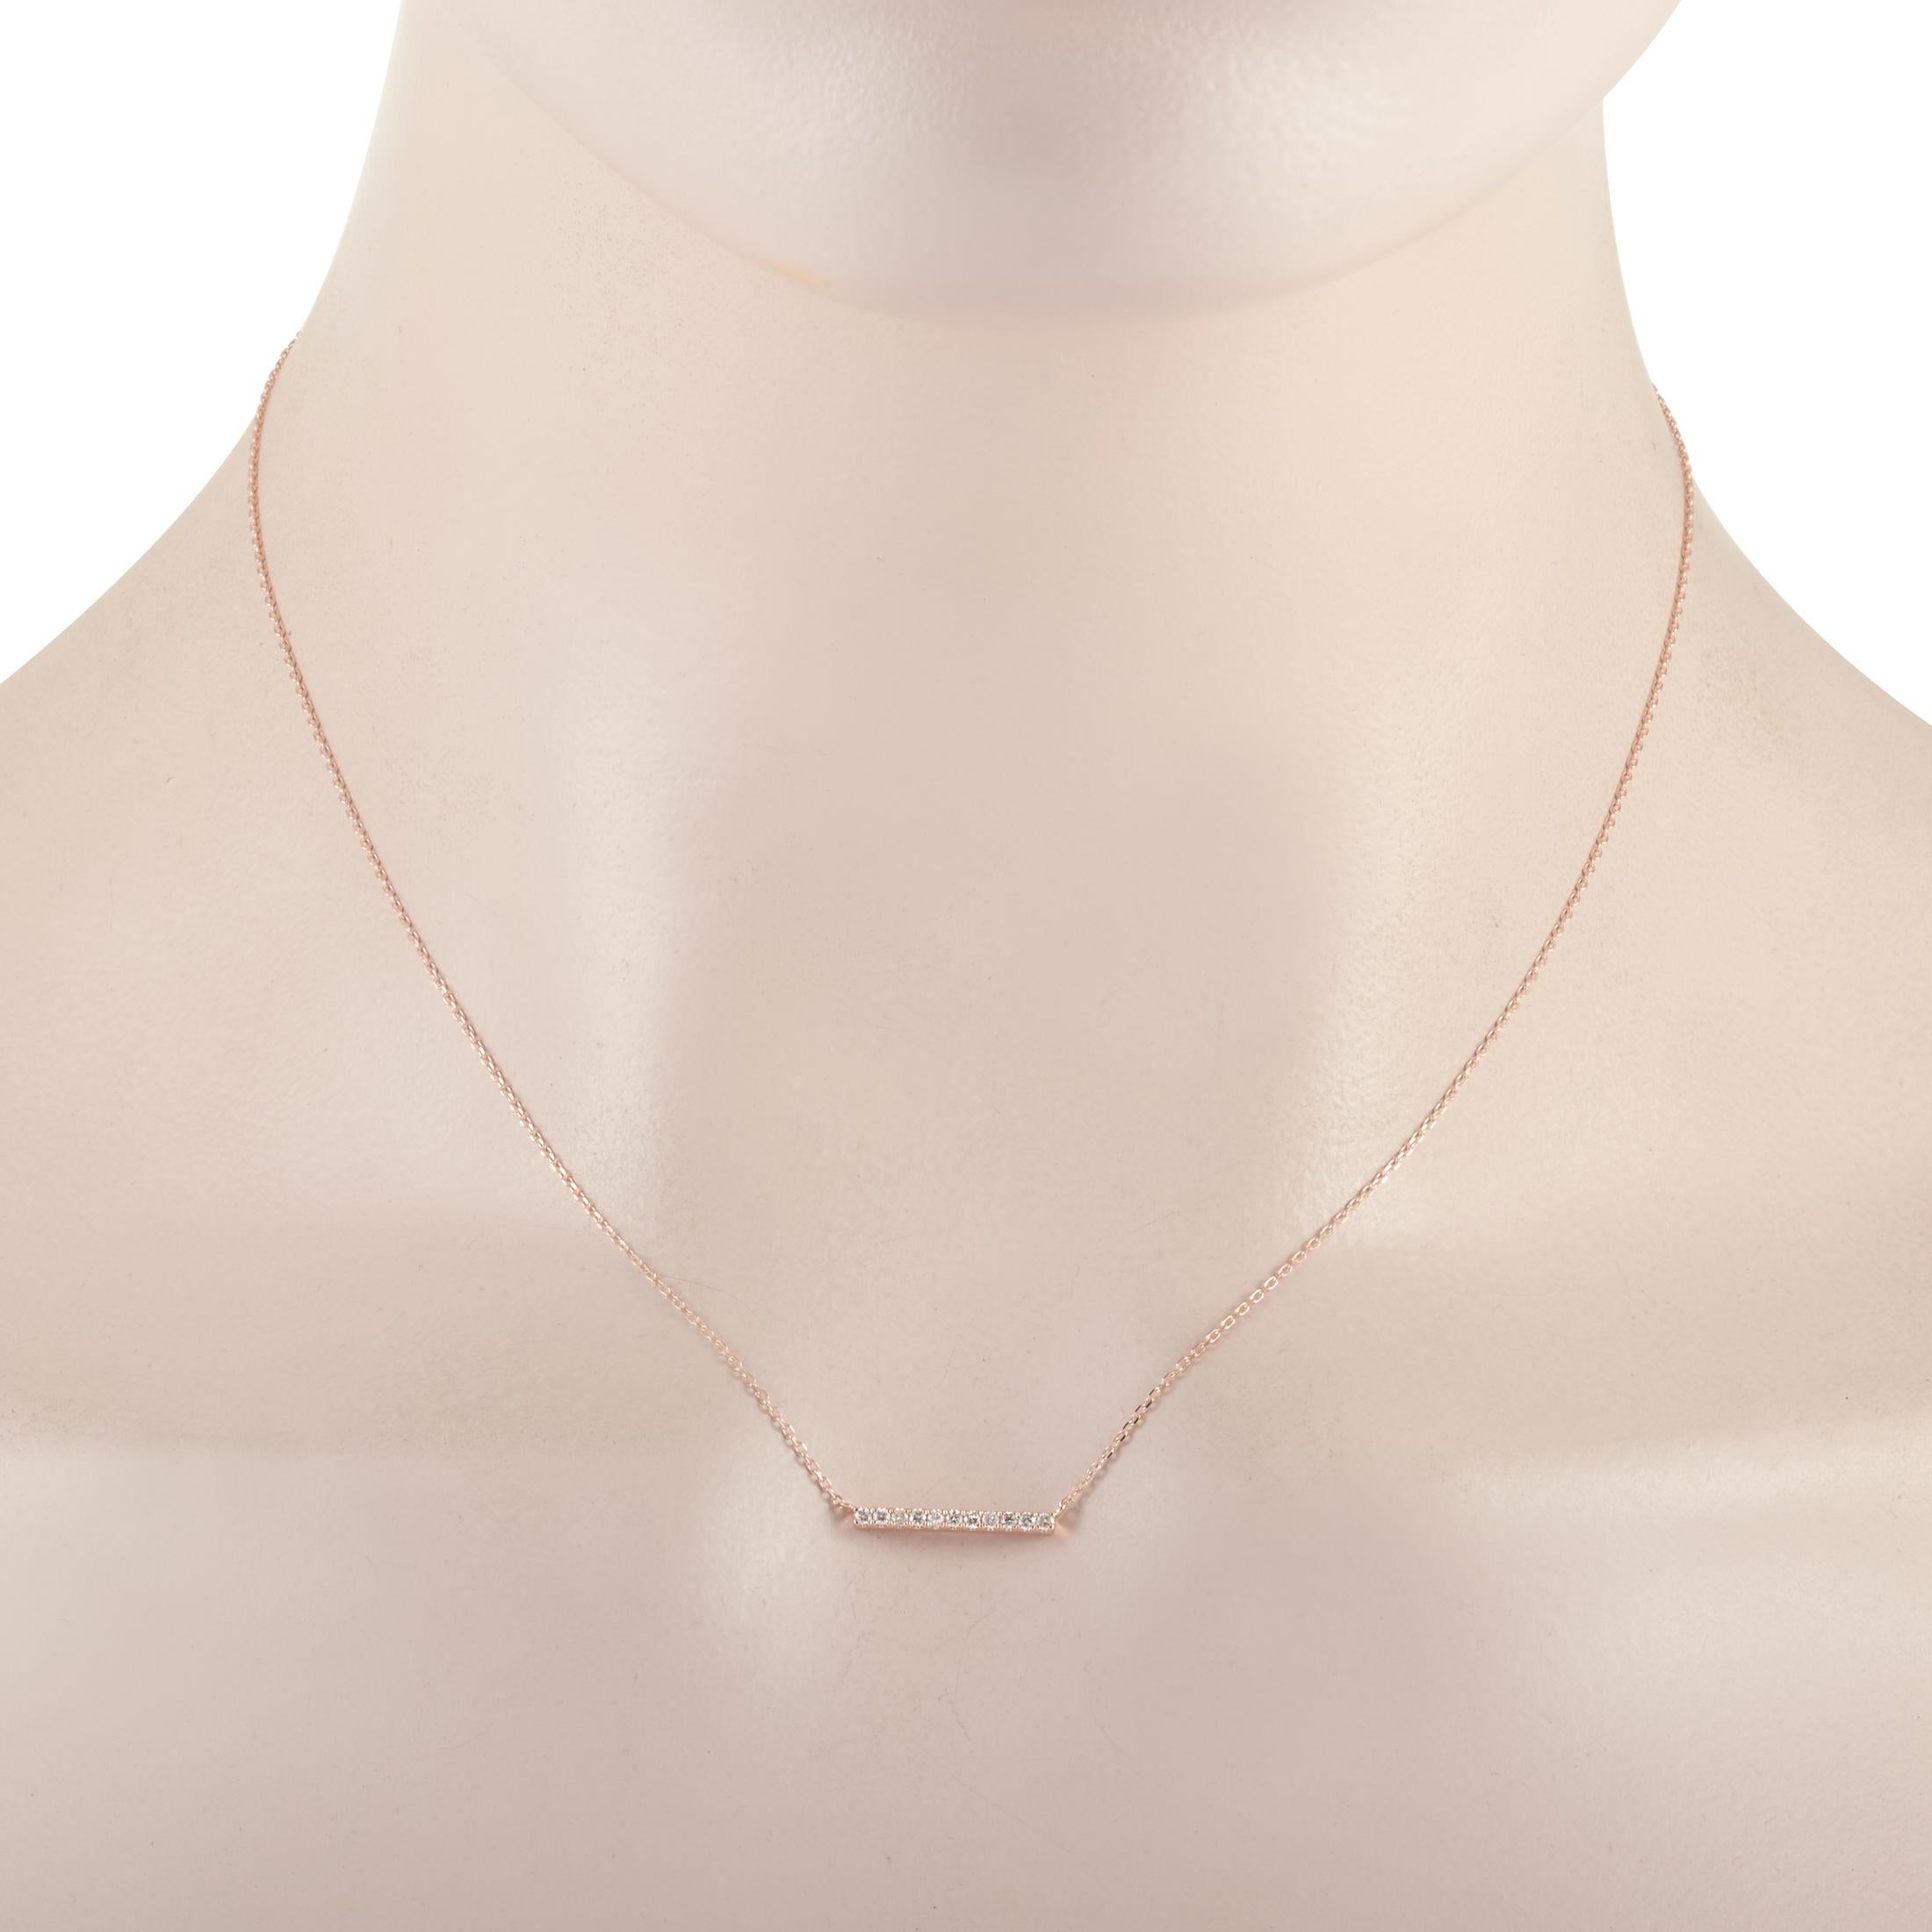 This LB Exclusive necklace is crafted from 14K rose gold and weighs 1.6 grams. It is presented with a 15” chain and boasts a pendant that measures 0.07” in length and 0.63” in width. The necklace is set with diamonds that total 0.10 carats.
 
